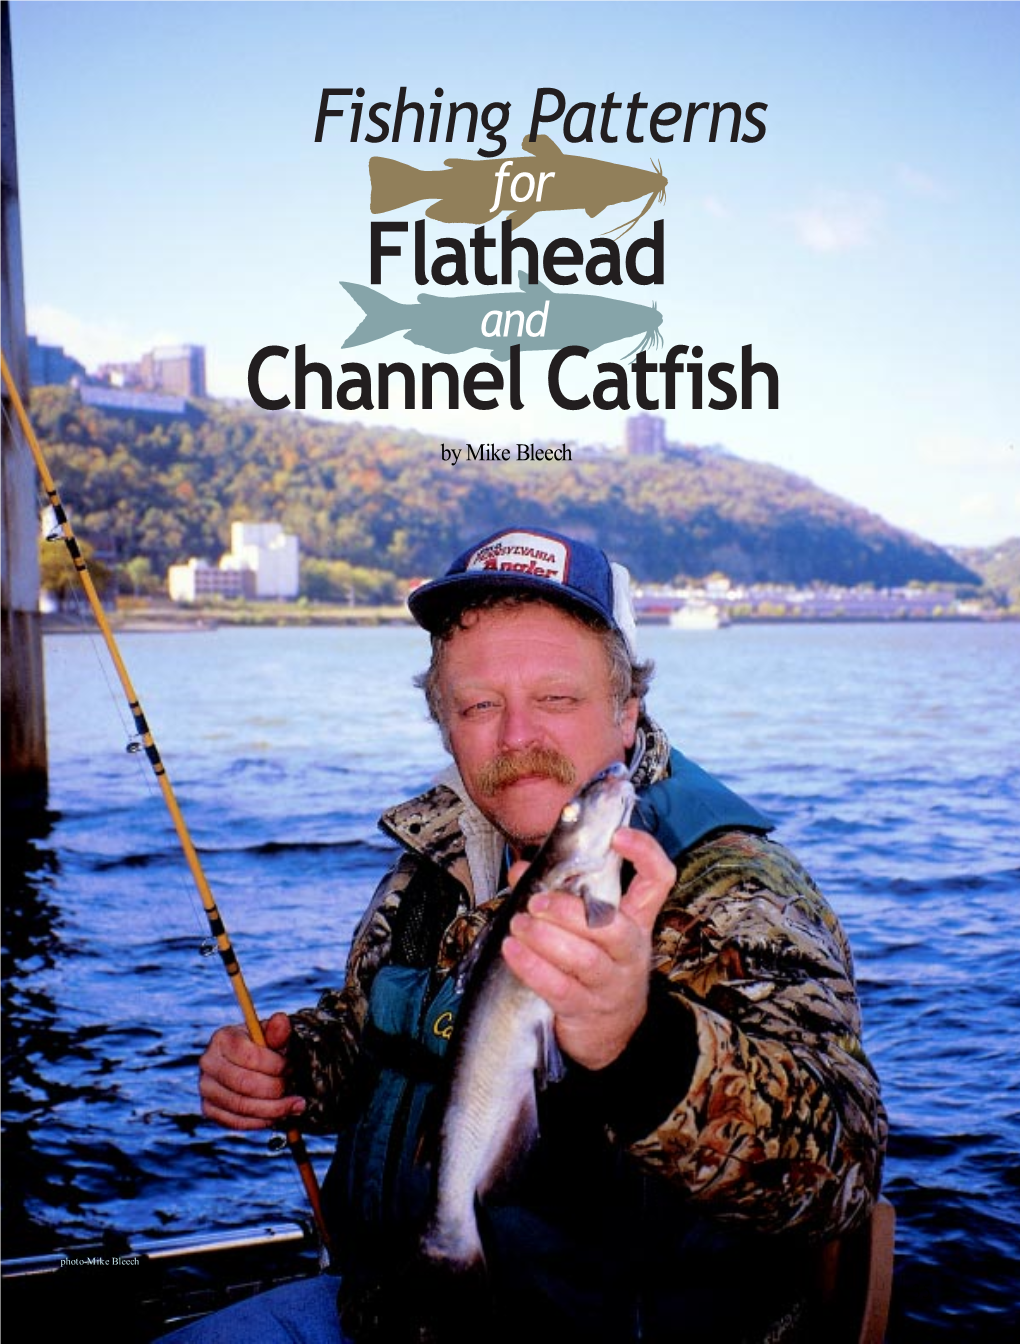 Fishing Patterns for Flathead and Channel Catfish